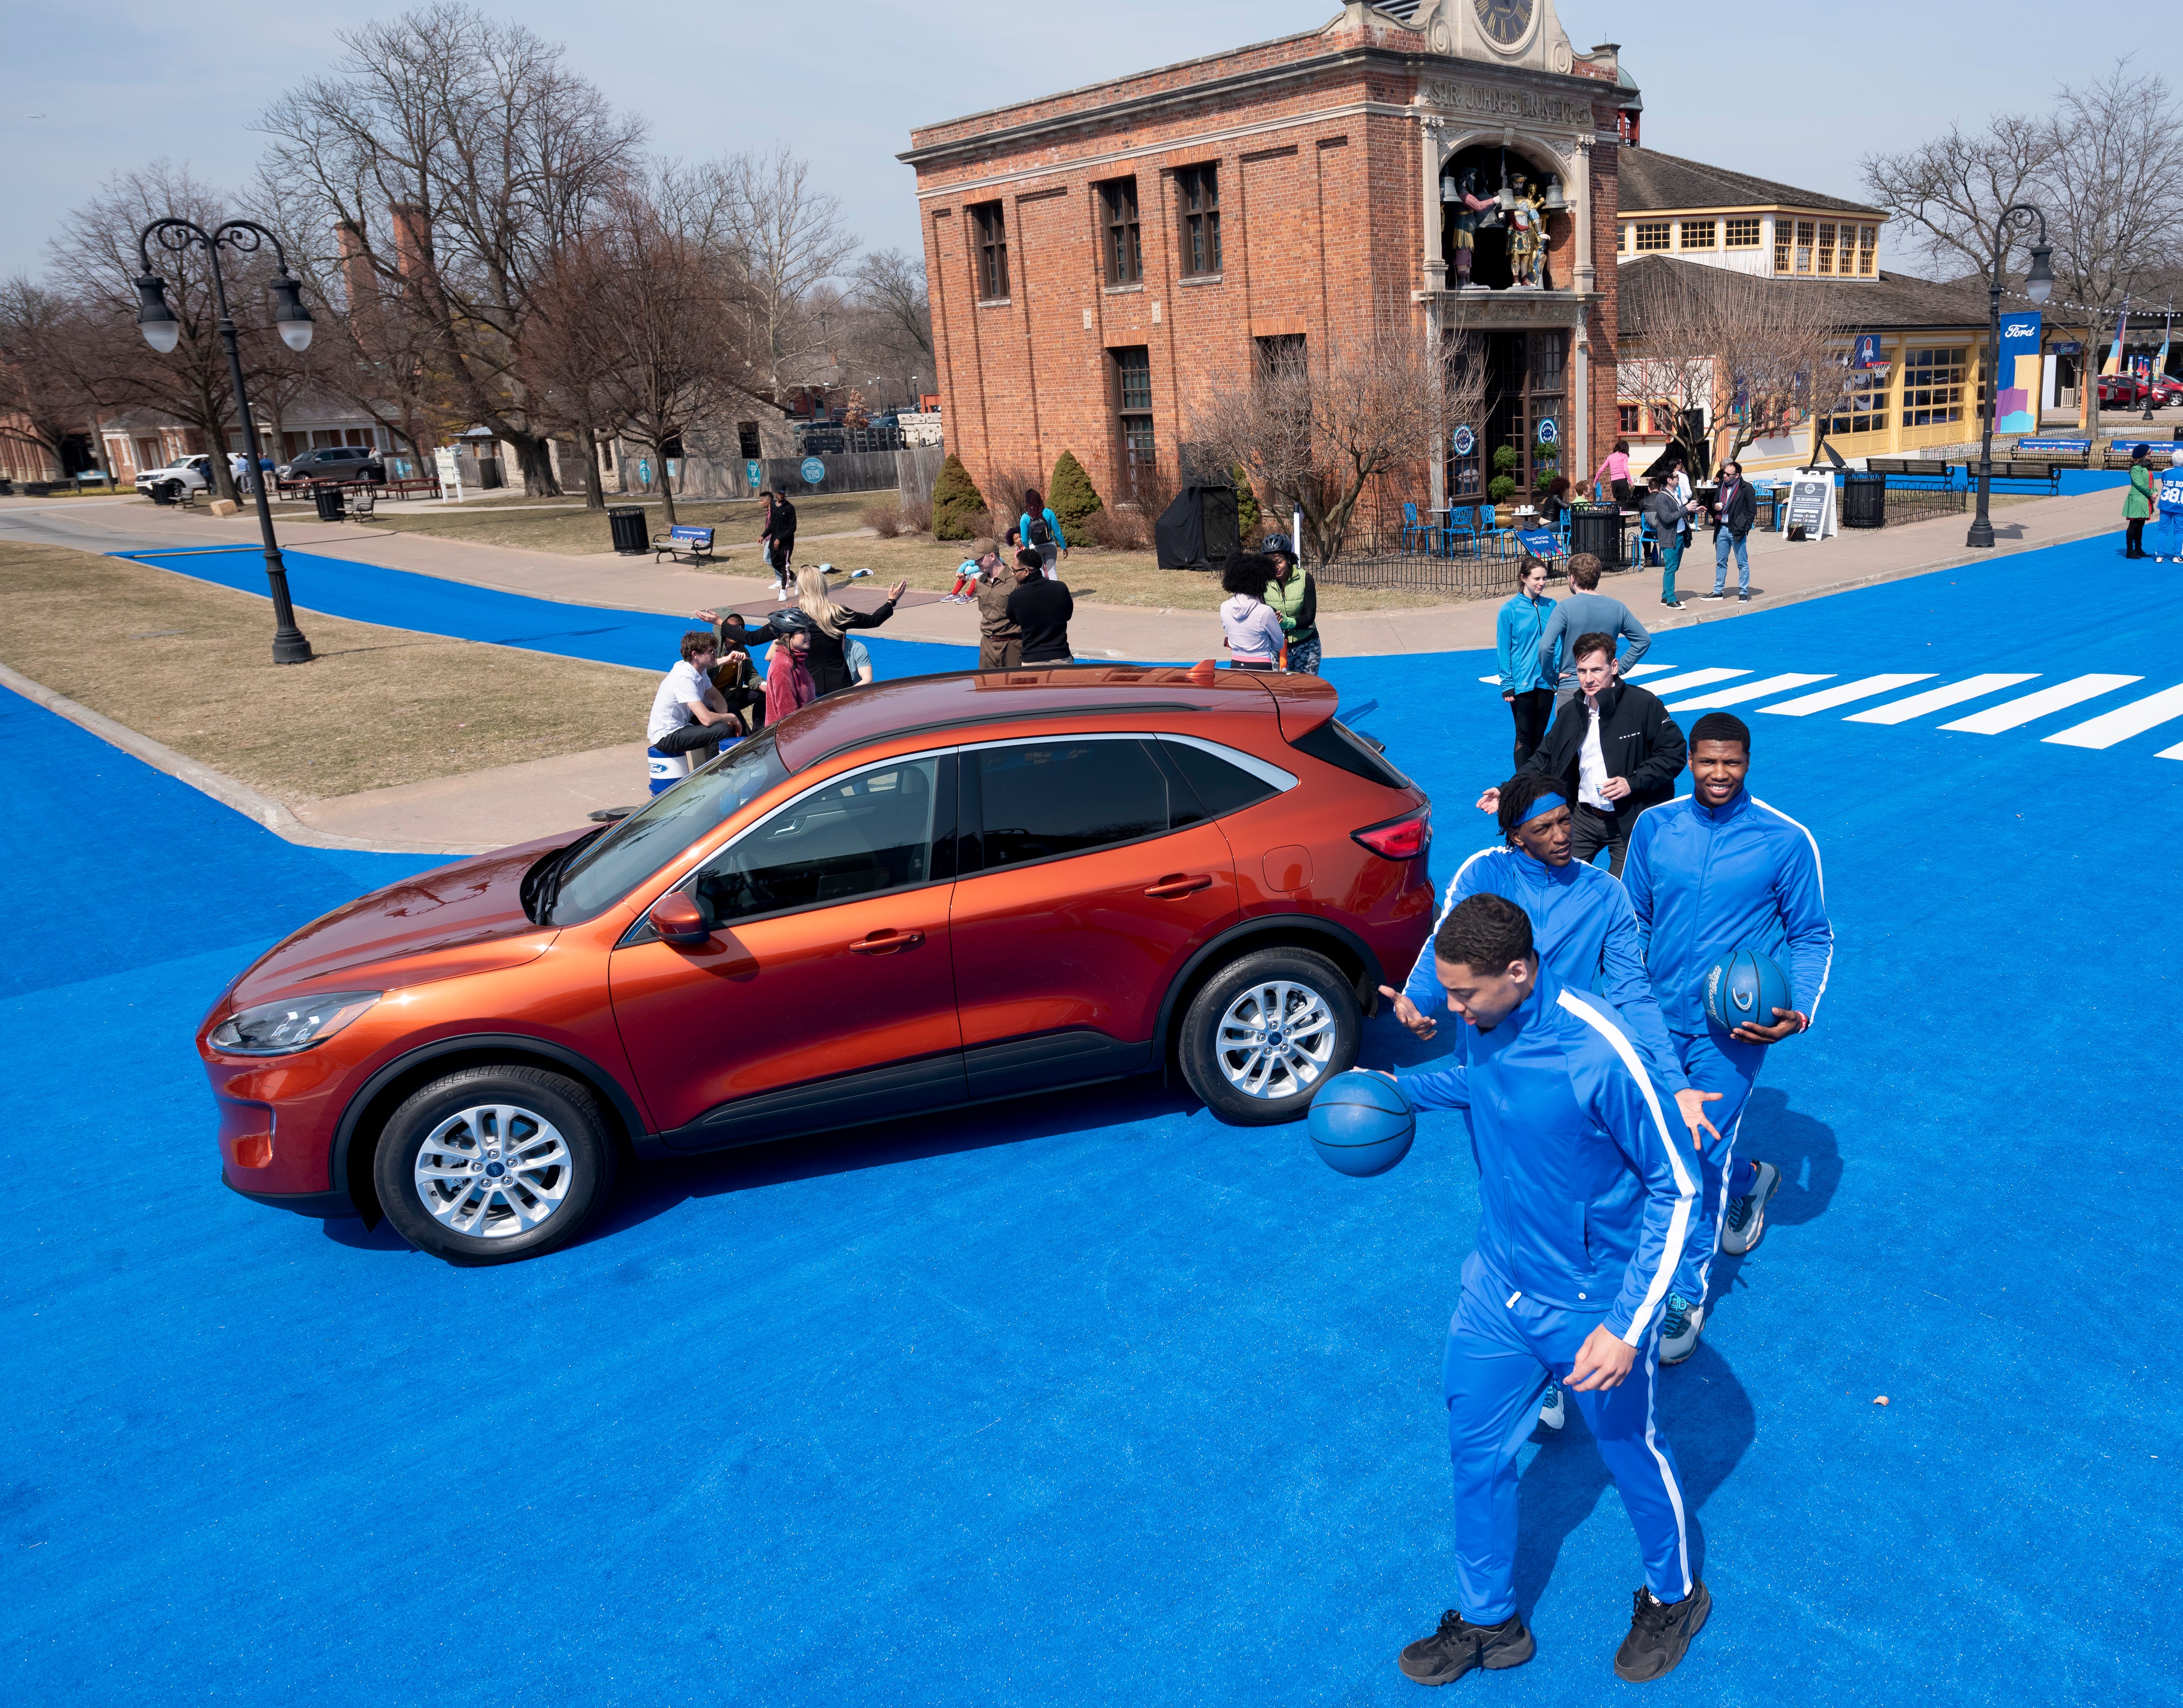 Members of the University of Michigan-Dearborn basketball team wander past a 2020 Ford Escape during a reveal at Greenfield Village, in Dearborn, March 28, 2019. Actors, artists and other performers participated in the event.